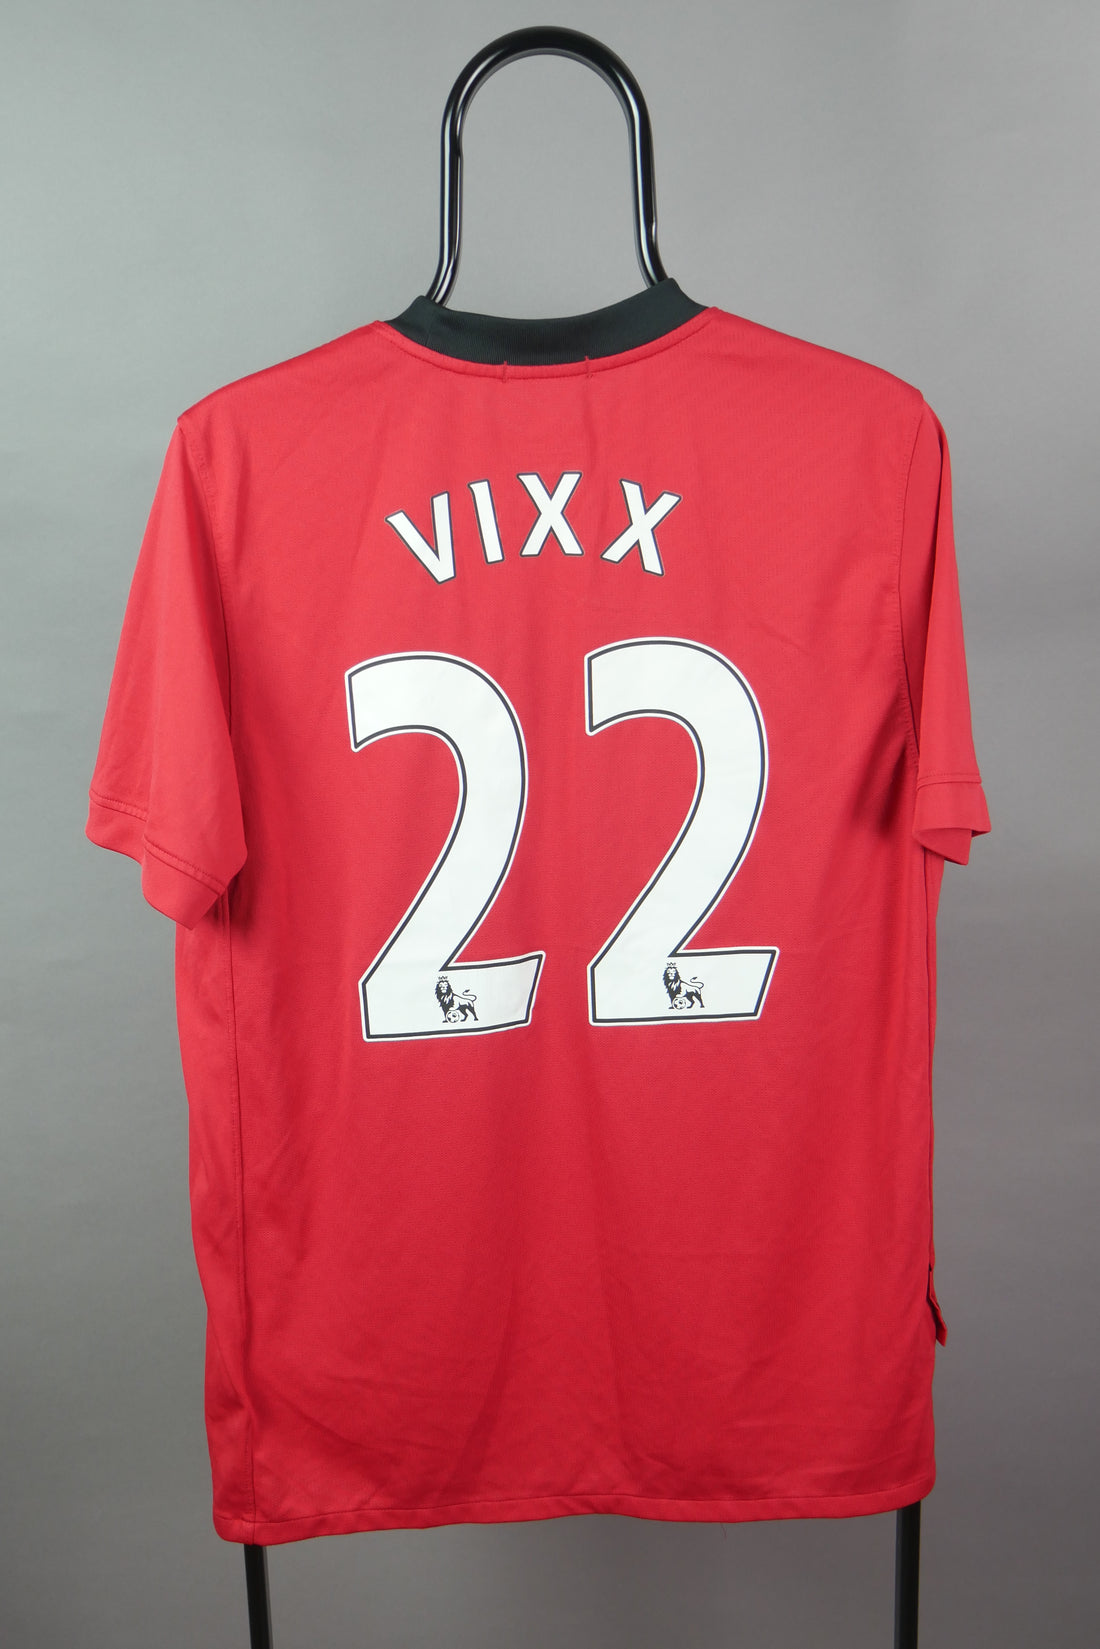 The Manchester United 2009 Shirt (M)